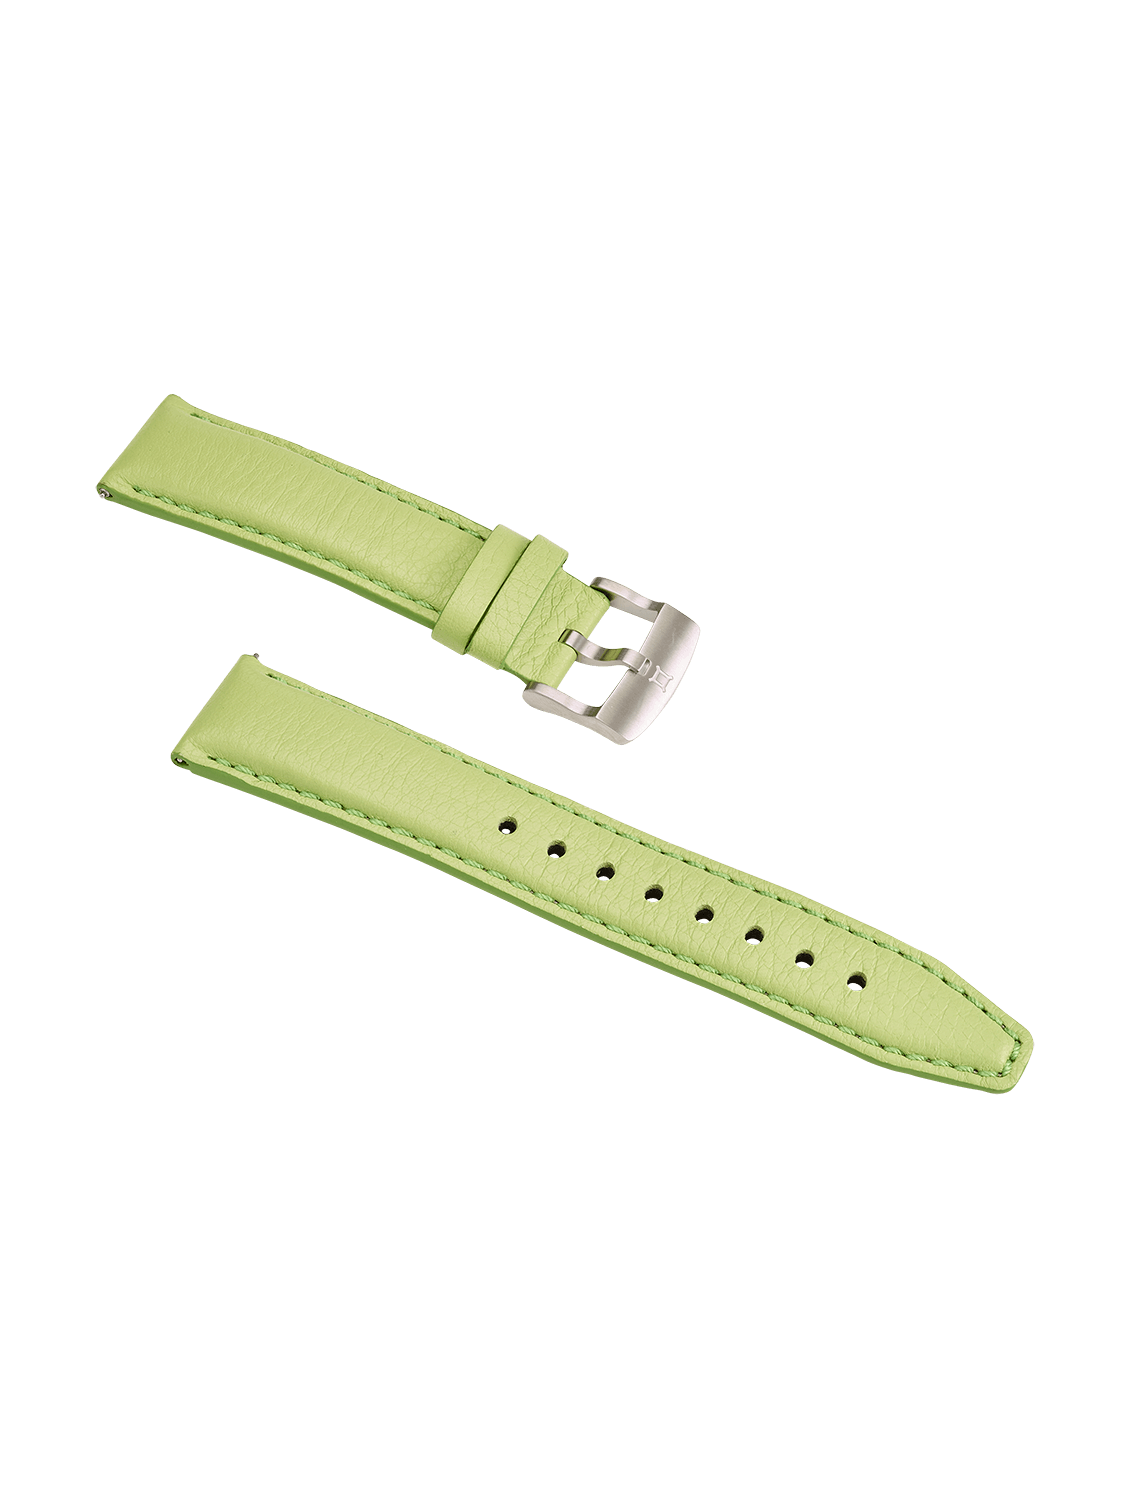 Vintage Longbridge car watch with jet black, light beige and olive green leather strap.